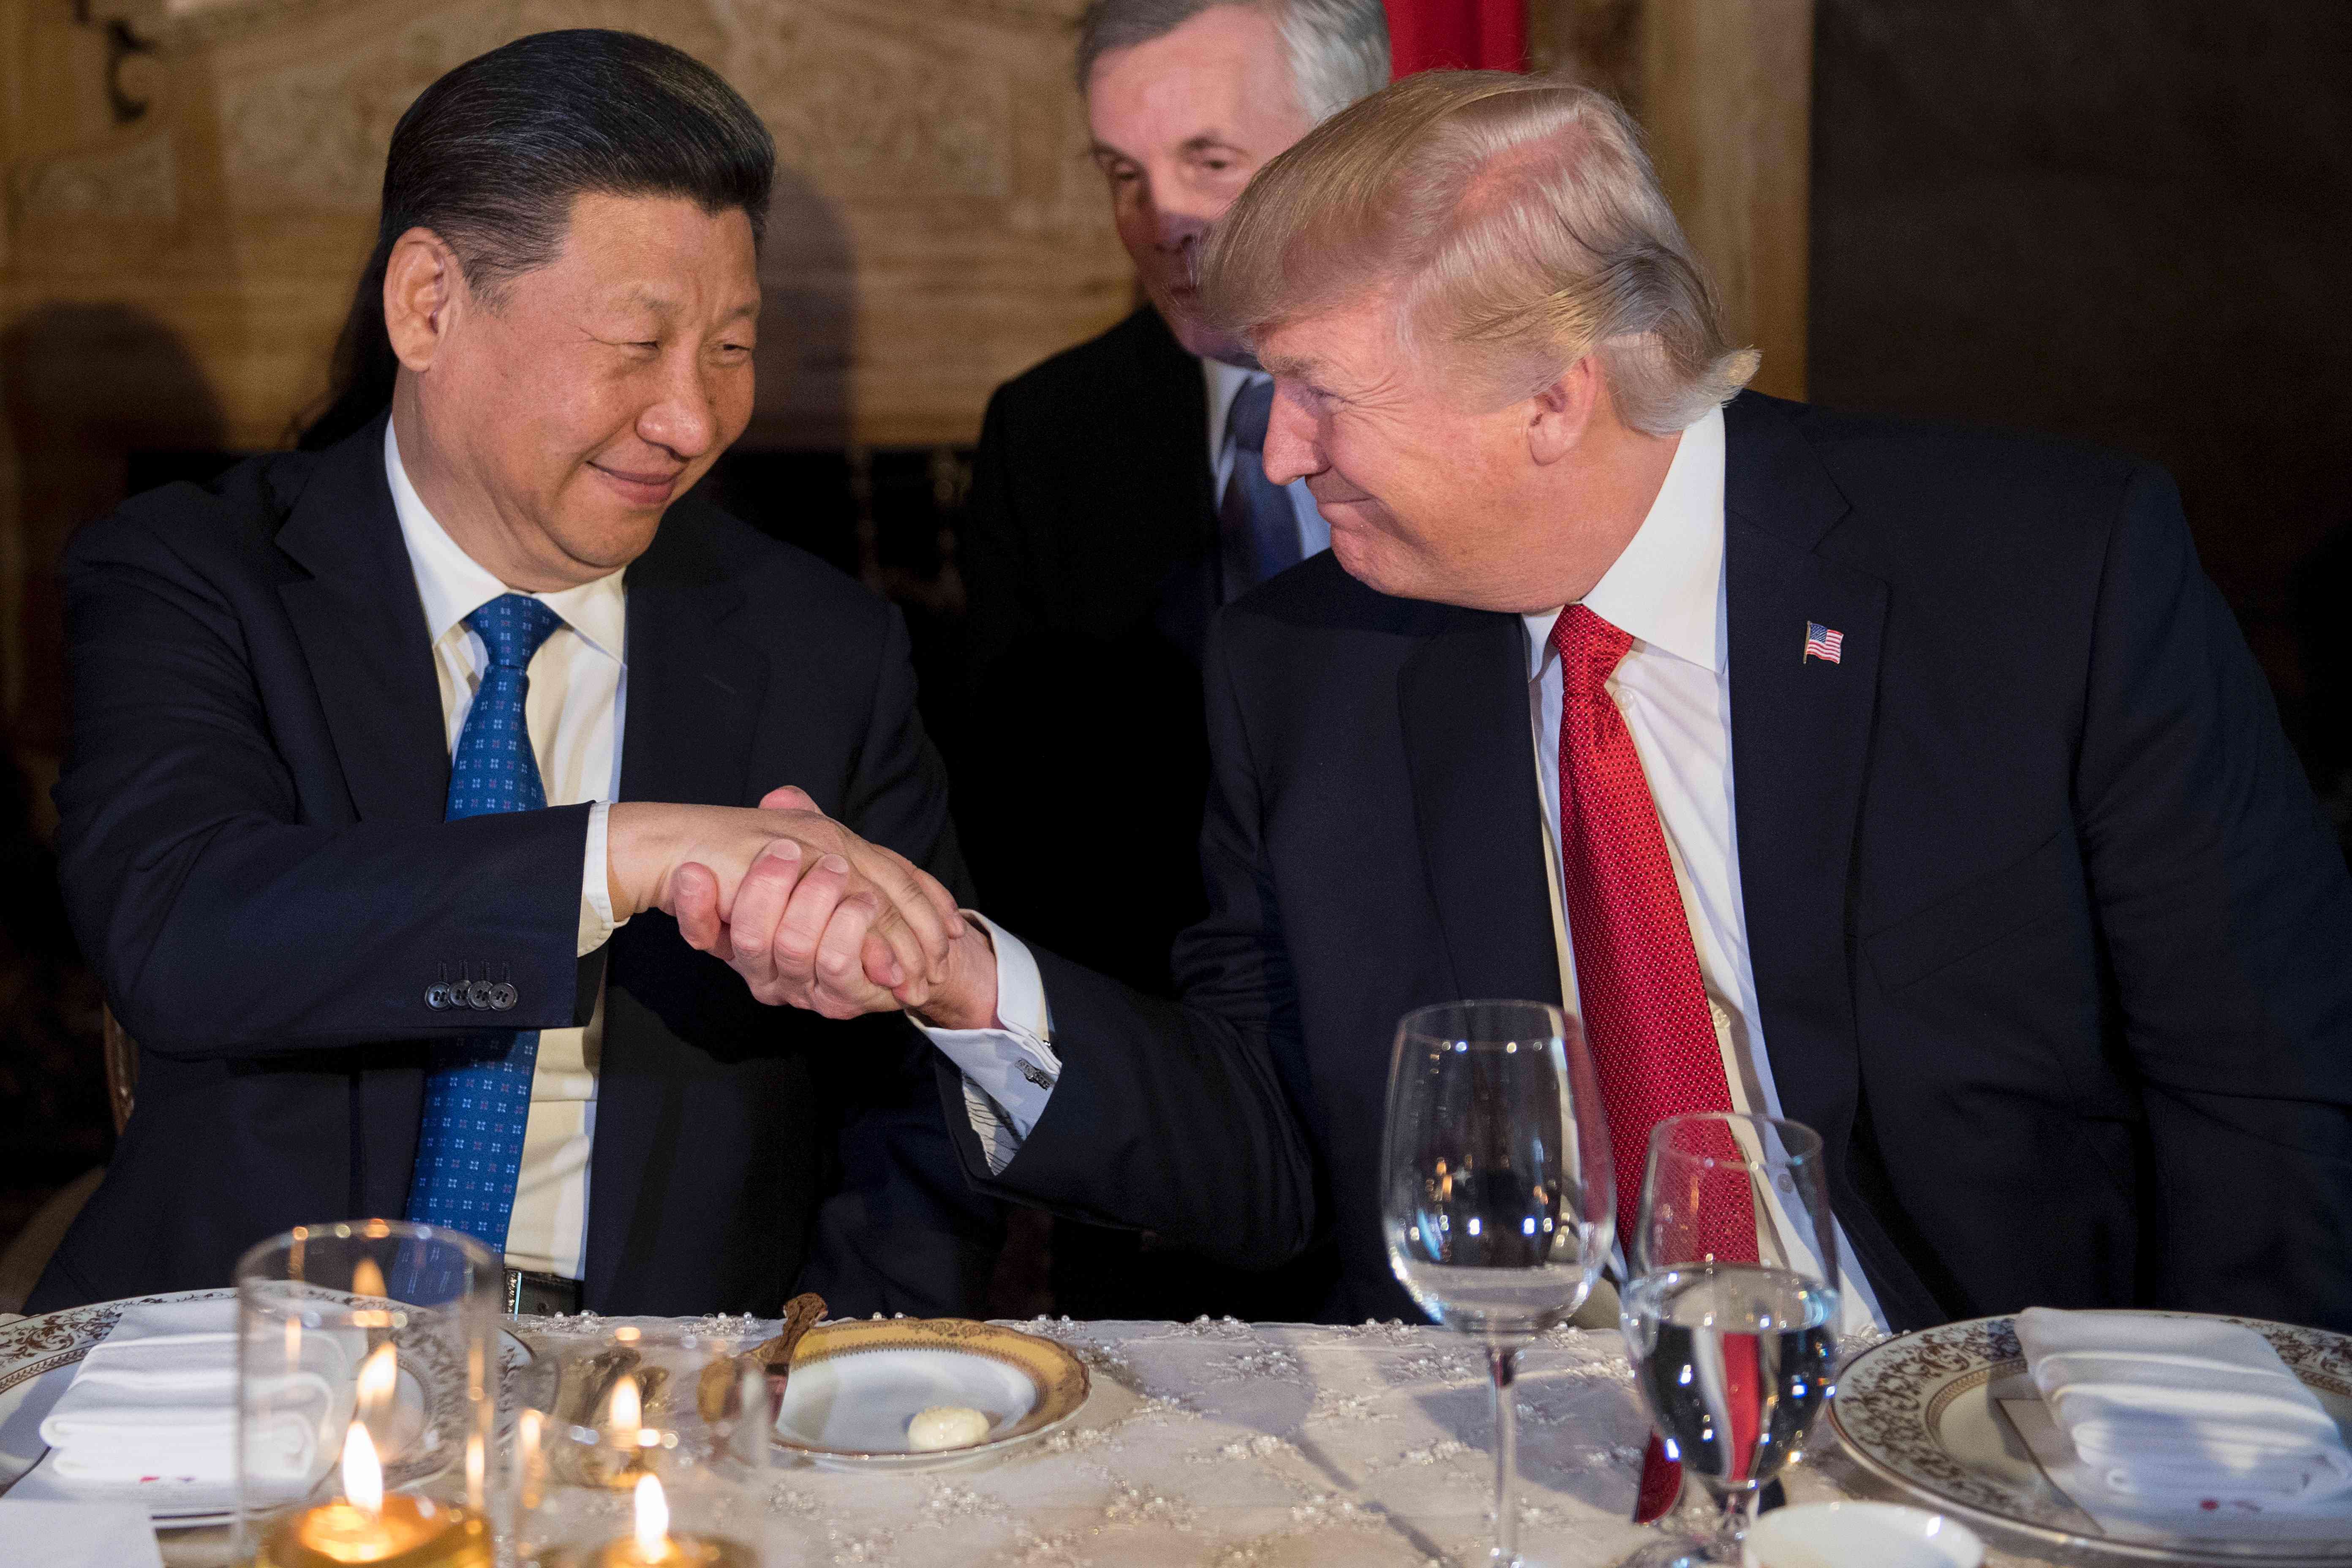 Chinese President Xi Jinping shake hands with US President Donald Trump during dinner at the Mar-a-Lago estate in Florida on Thursday. Photo: AFP